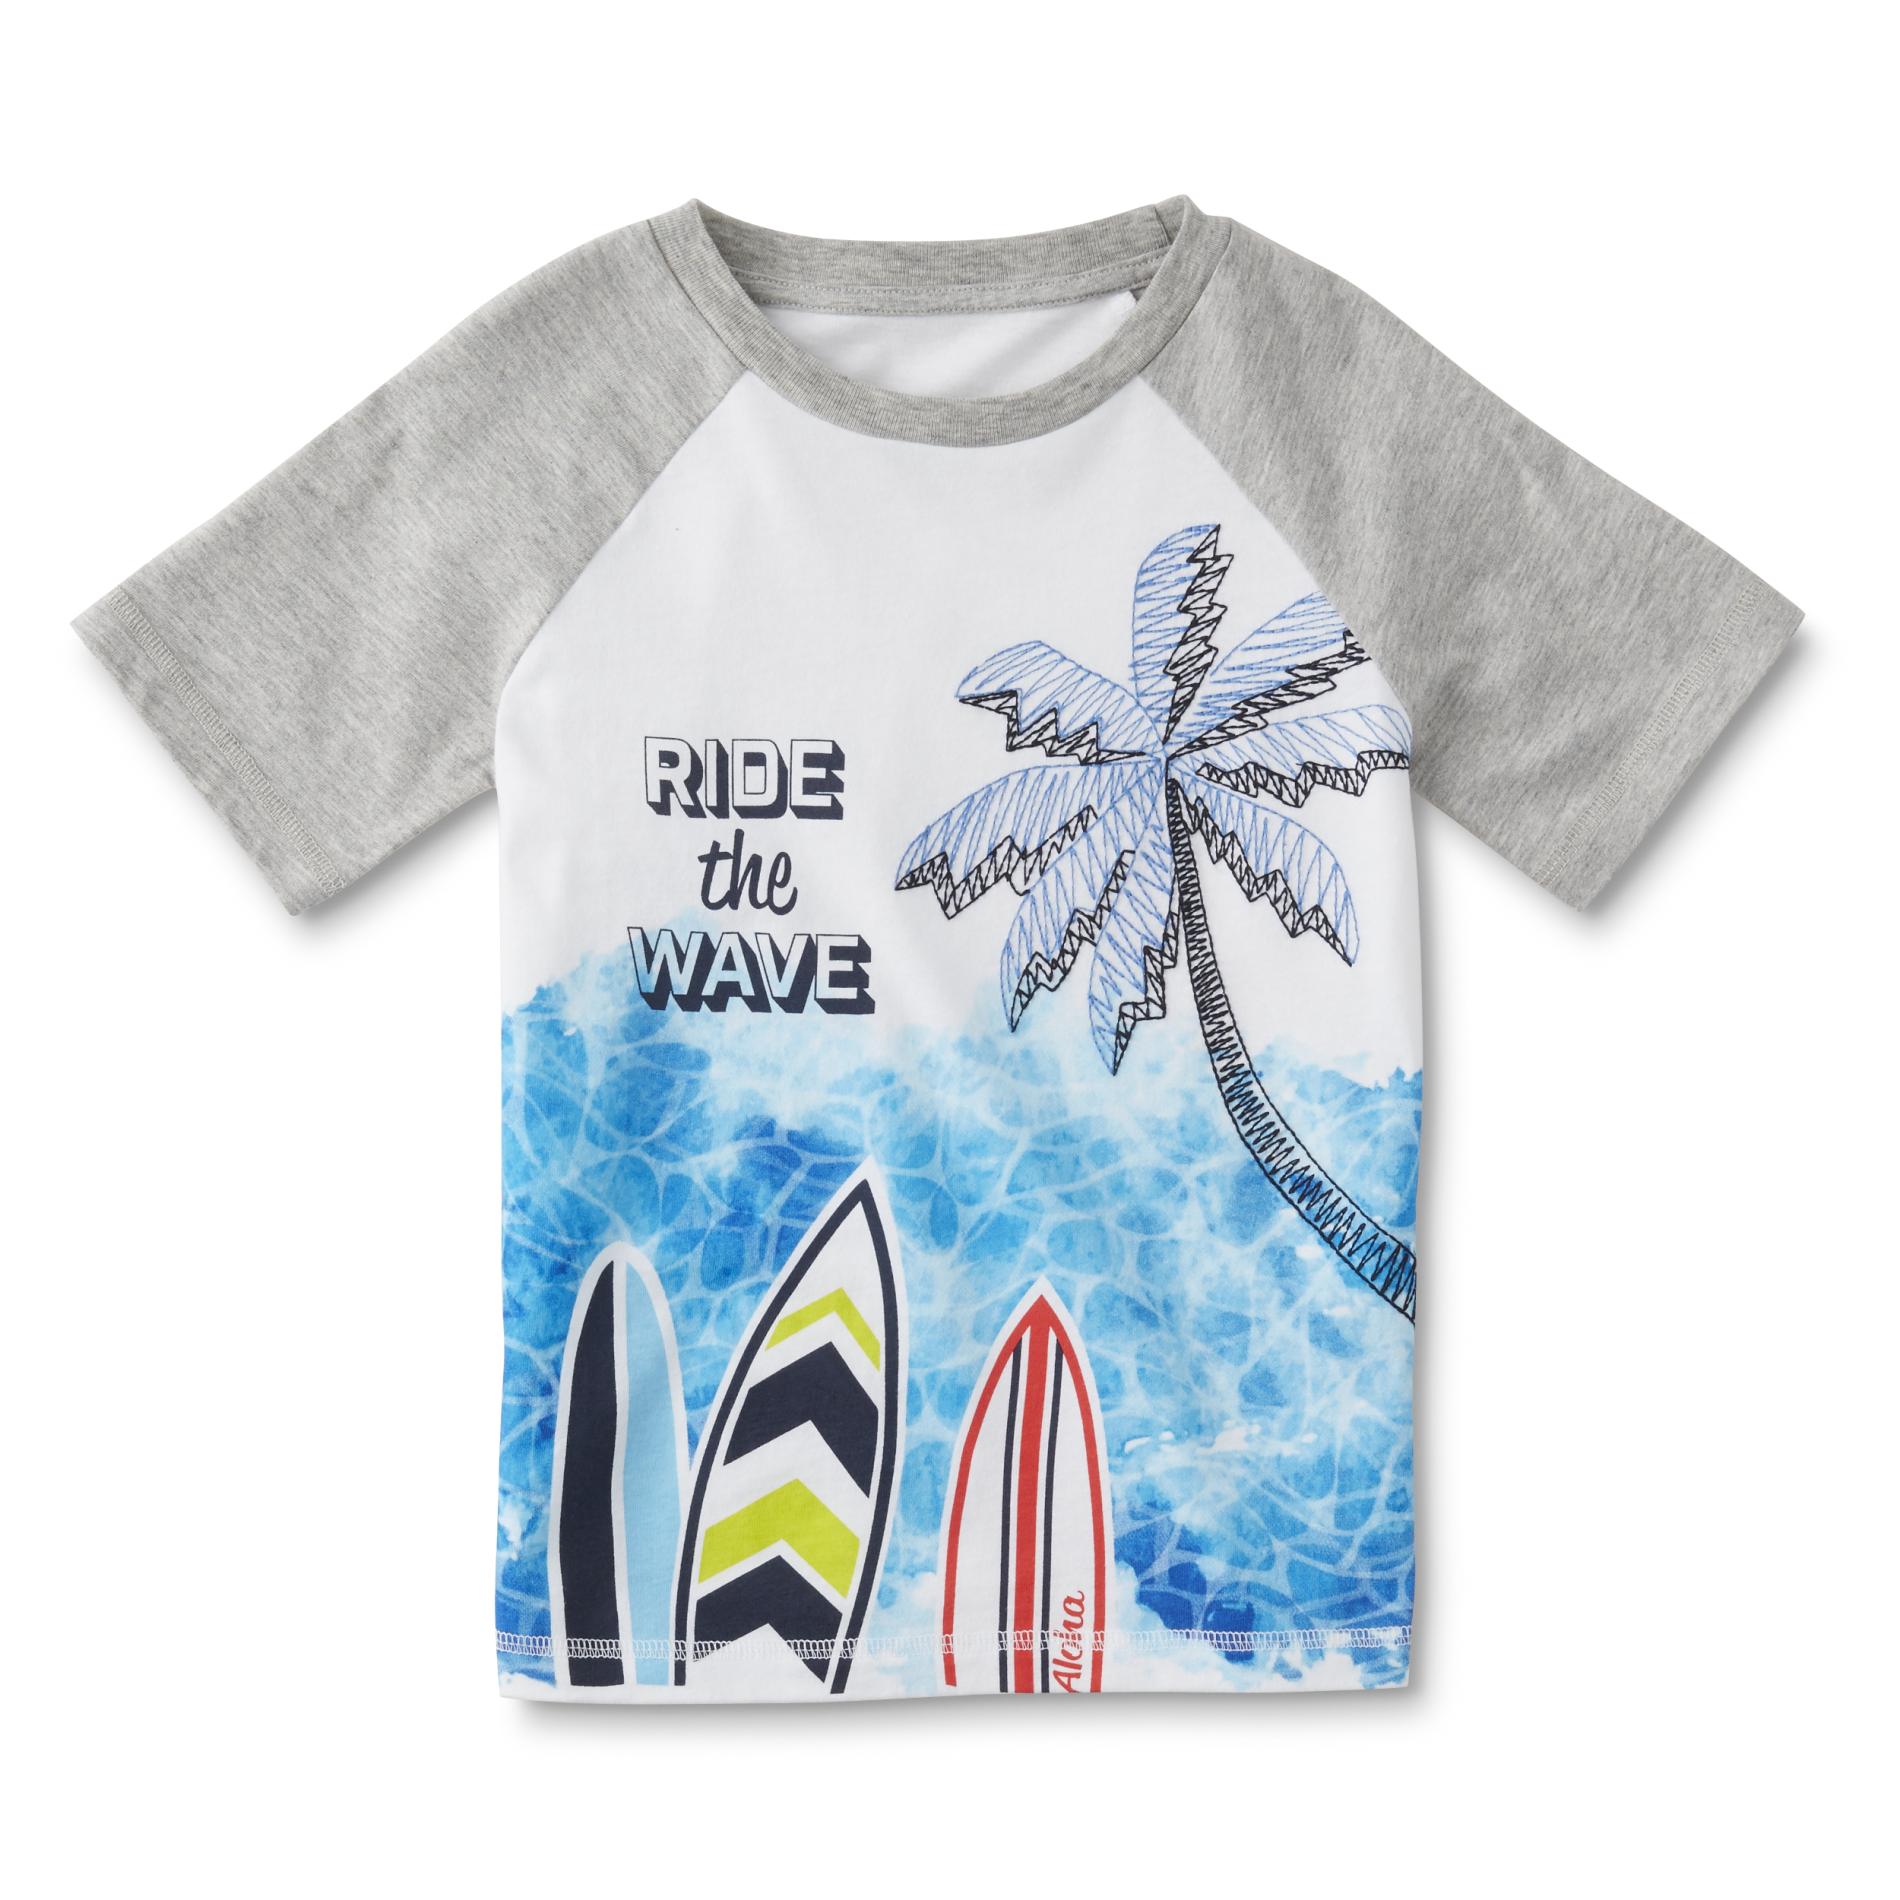 Toughskins Infant & Toddler Boys' Graphic T-Shirt - Ride the Wave